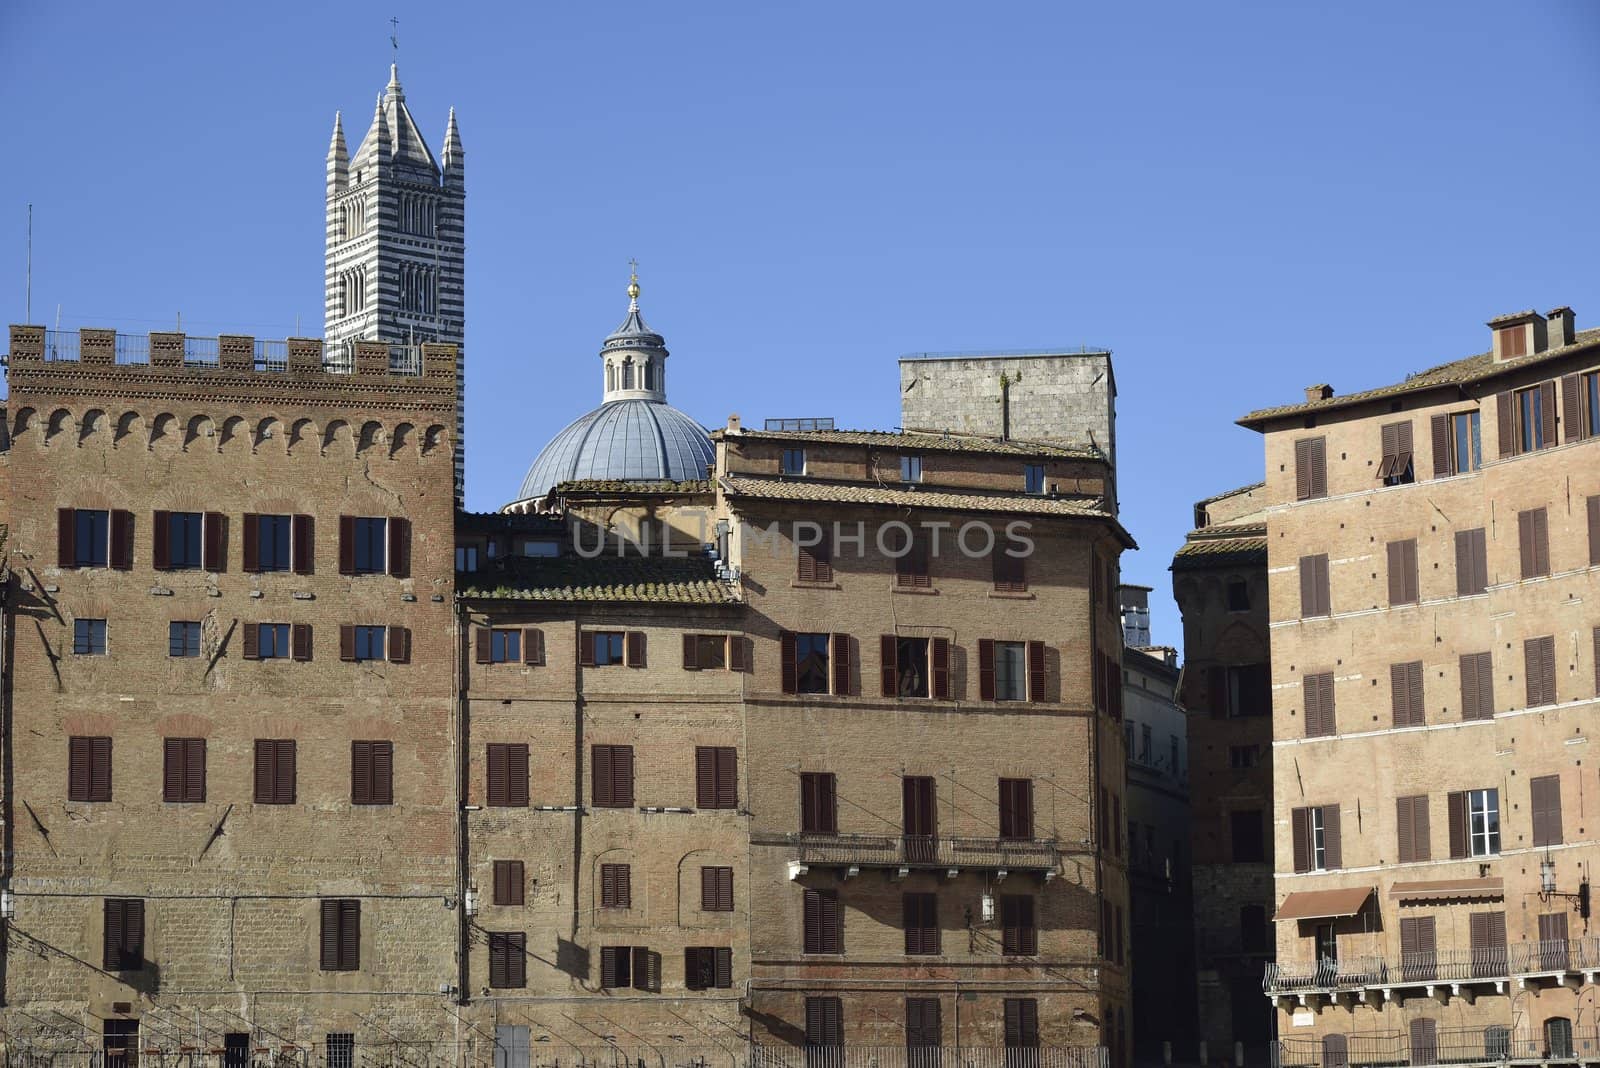 Ancient palace in Siena by mizio1970